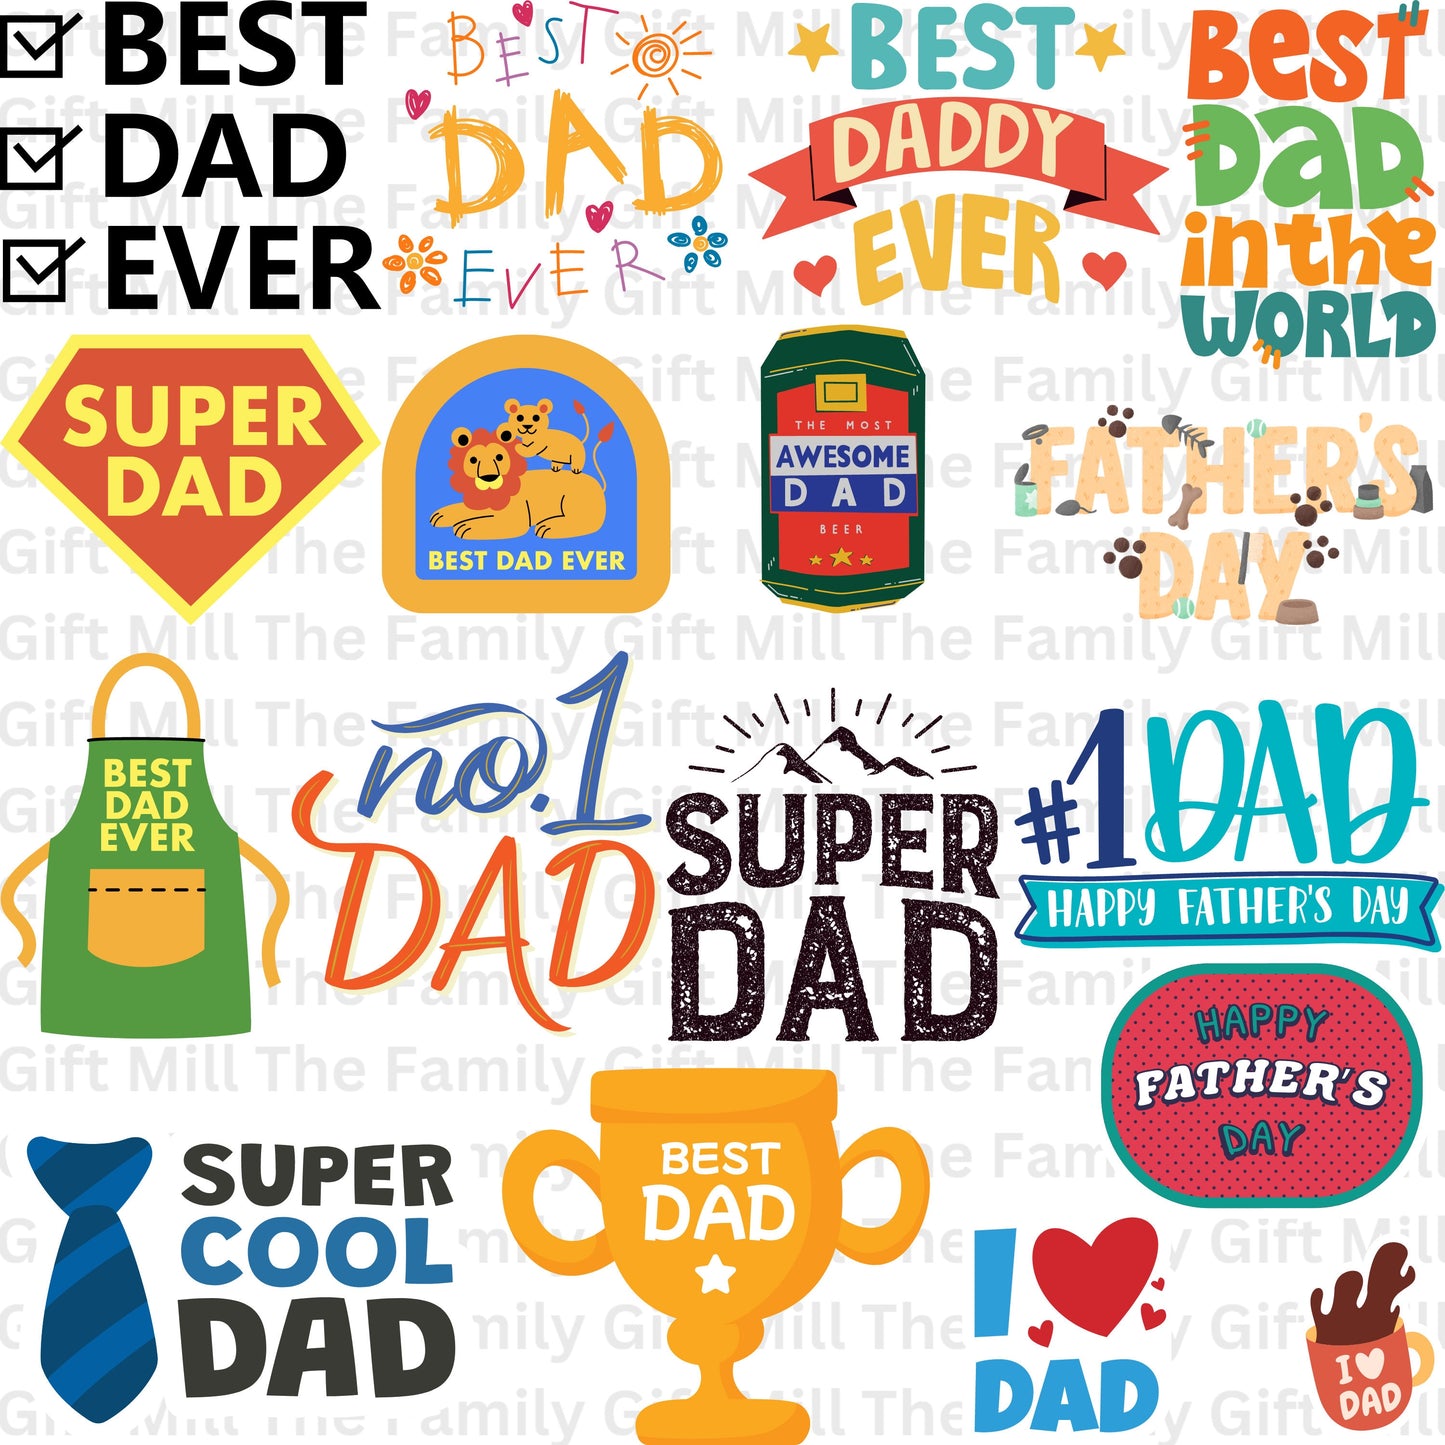 Alcohol SVG Bundle - Beer Drinking Cheers and Beers Dad Beer Gift - Cricut Files - Father's Day - Beer Babe - Beer Mugs Silhouette